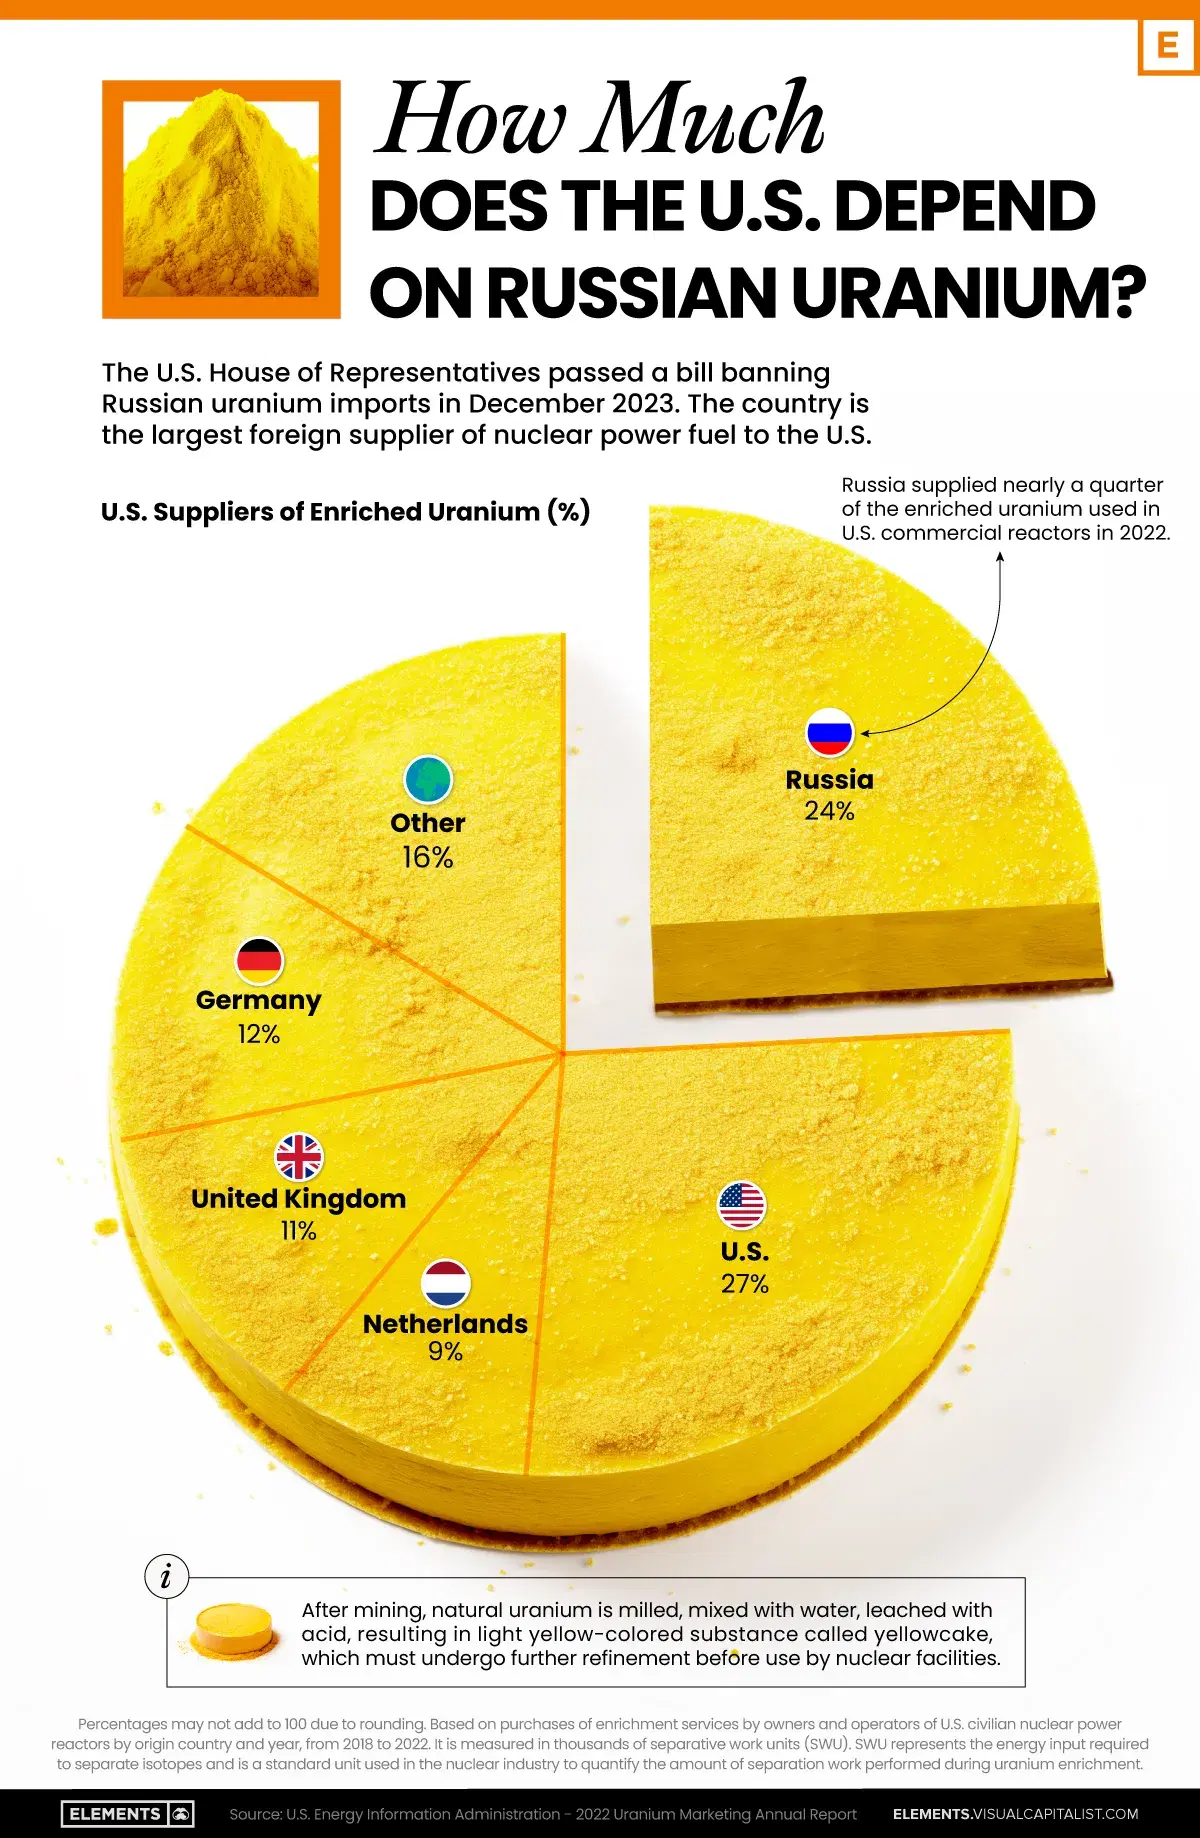 How Much Does the U.S. Depend on Russian Uranium?